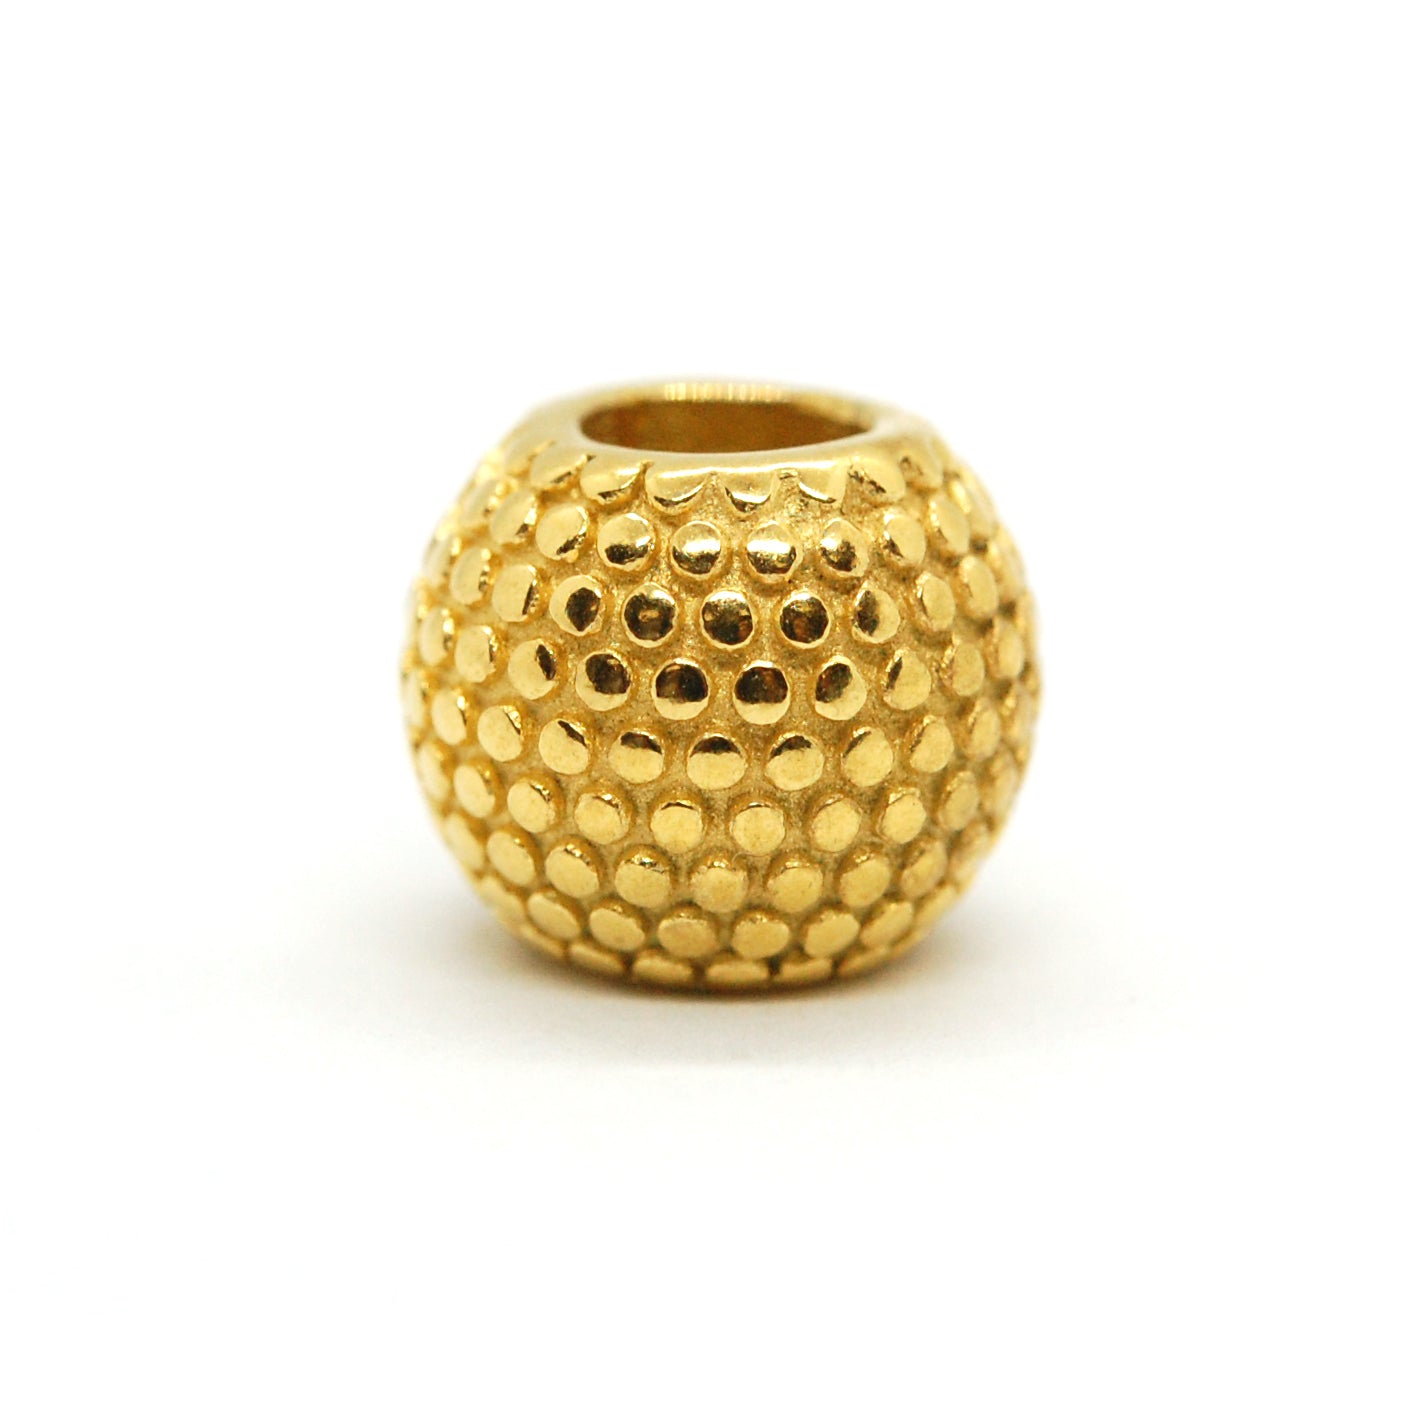 ESCM 6651: Emo Gold Plated Dotted Ball Charm